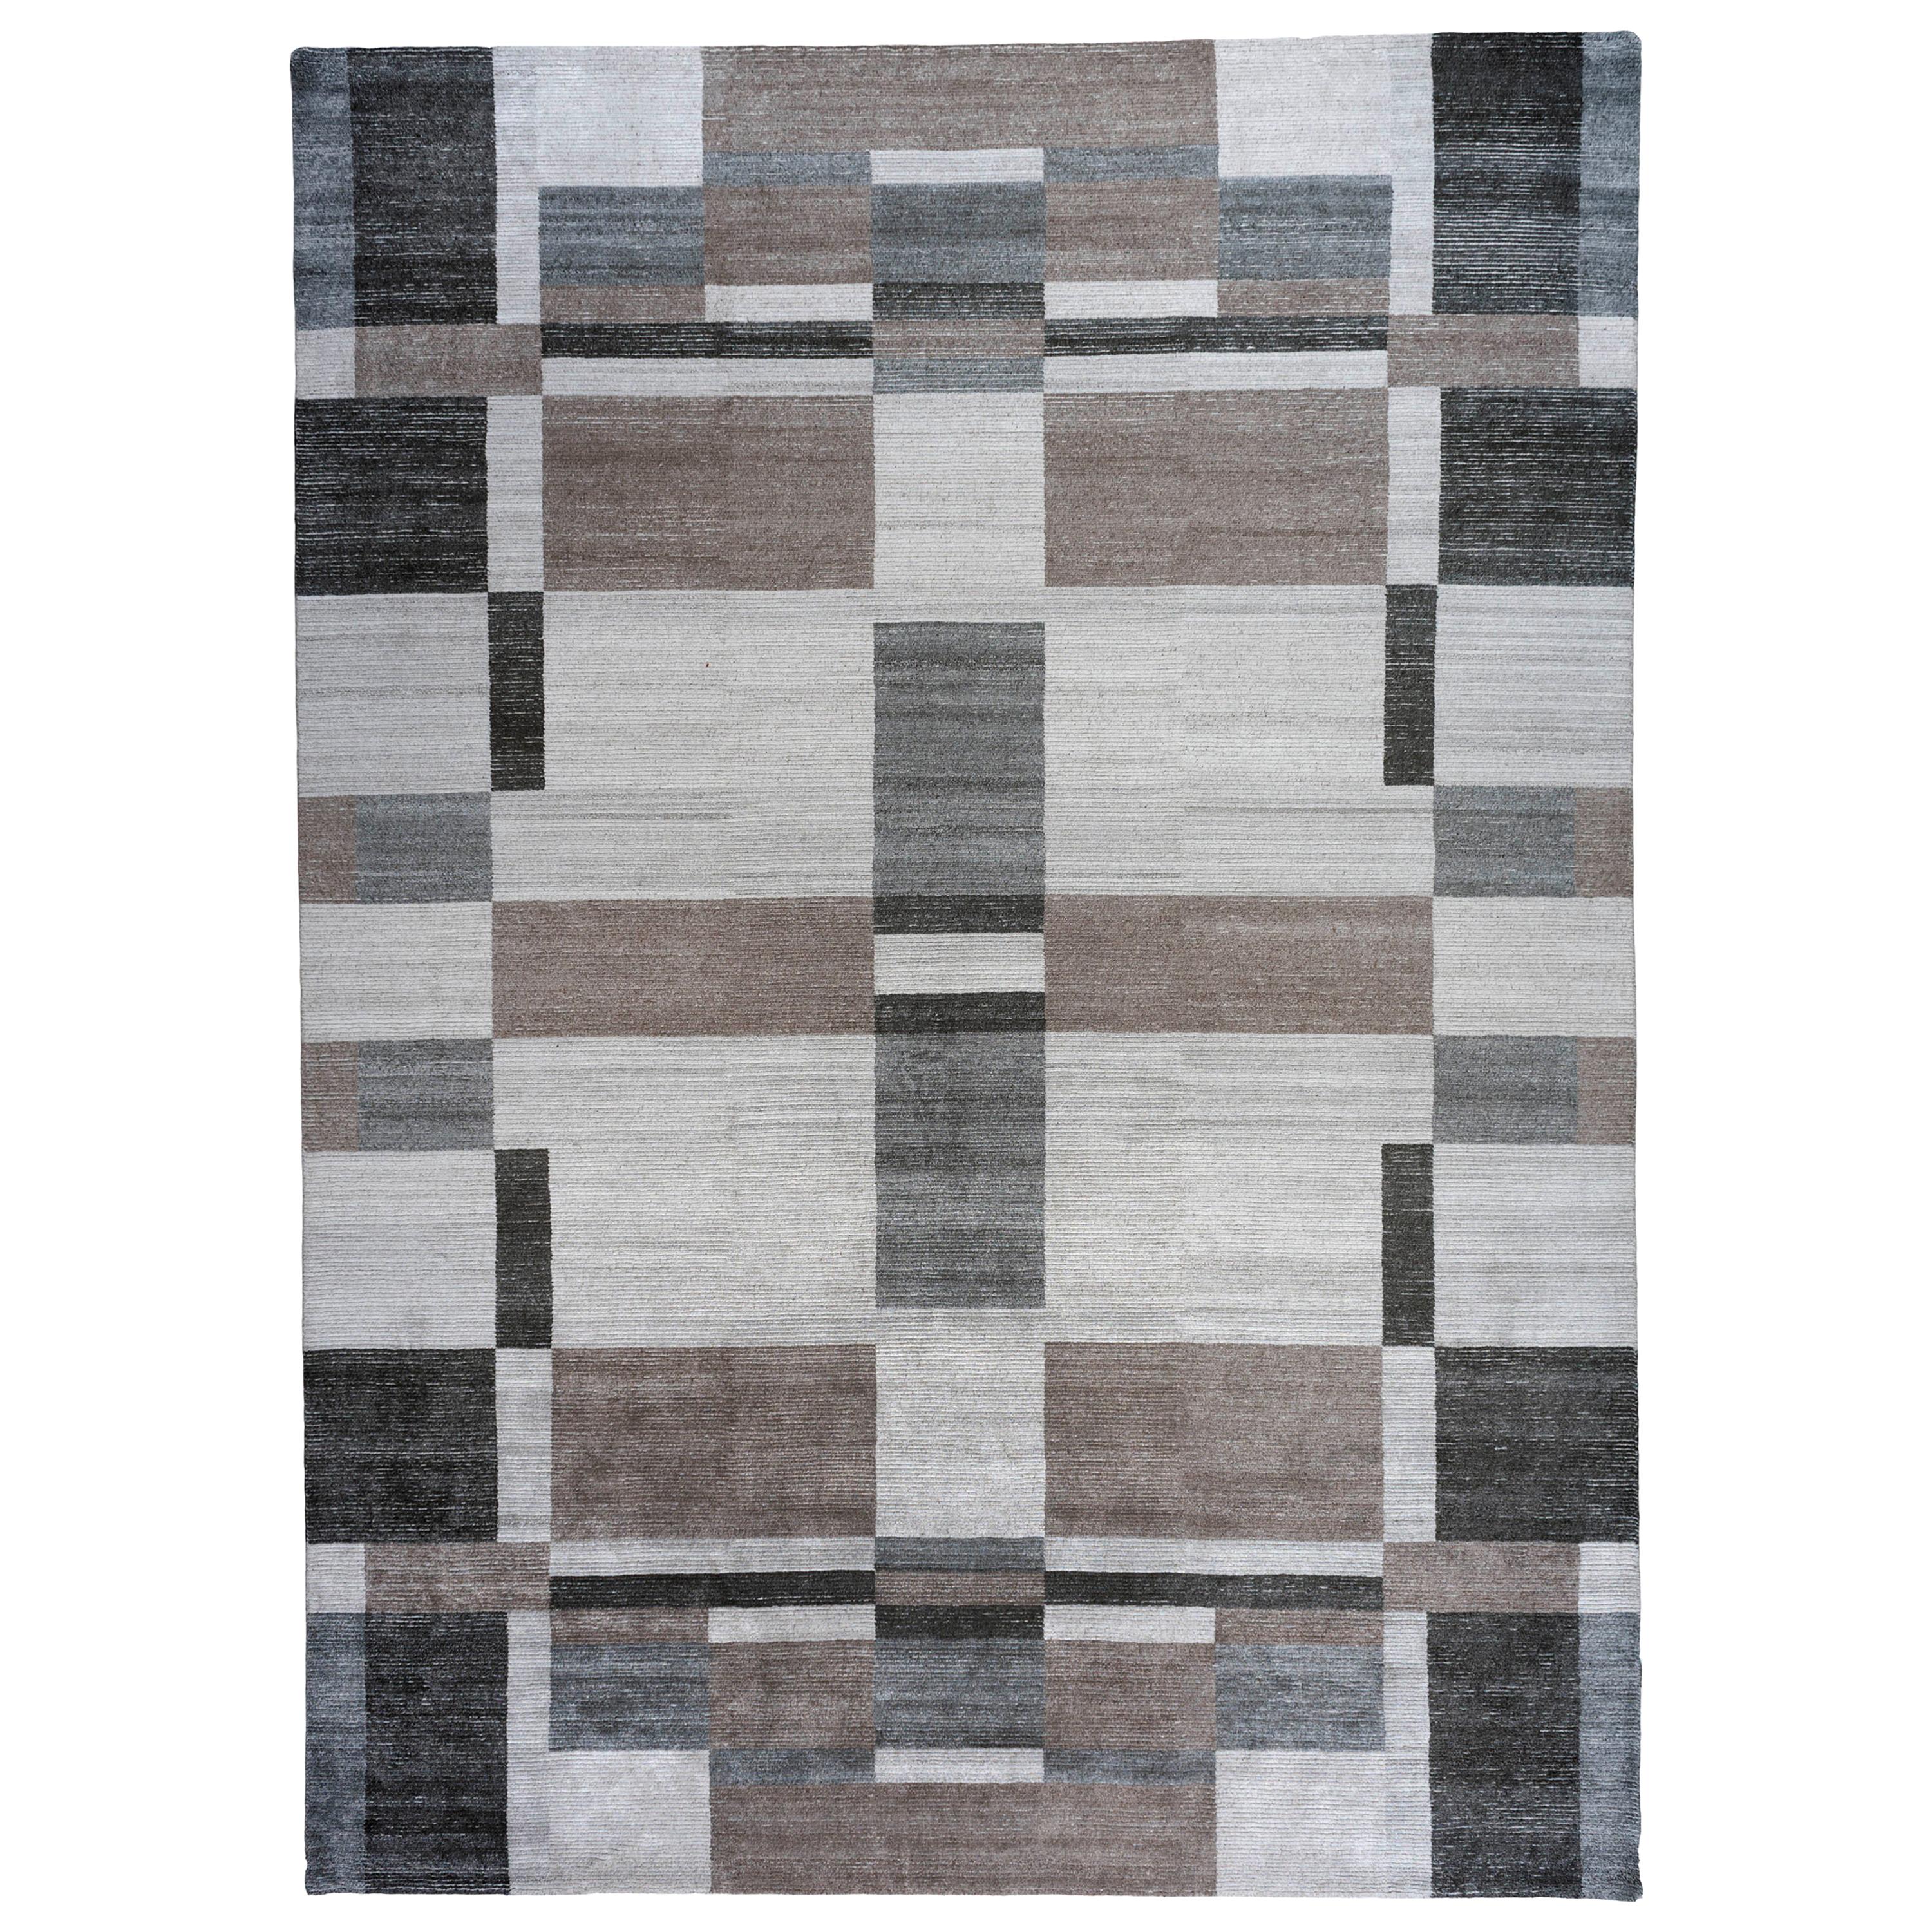 Taupe and Grey Contemporary Indian Area Rug